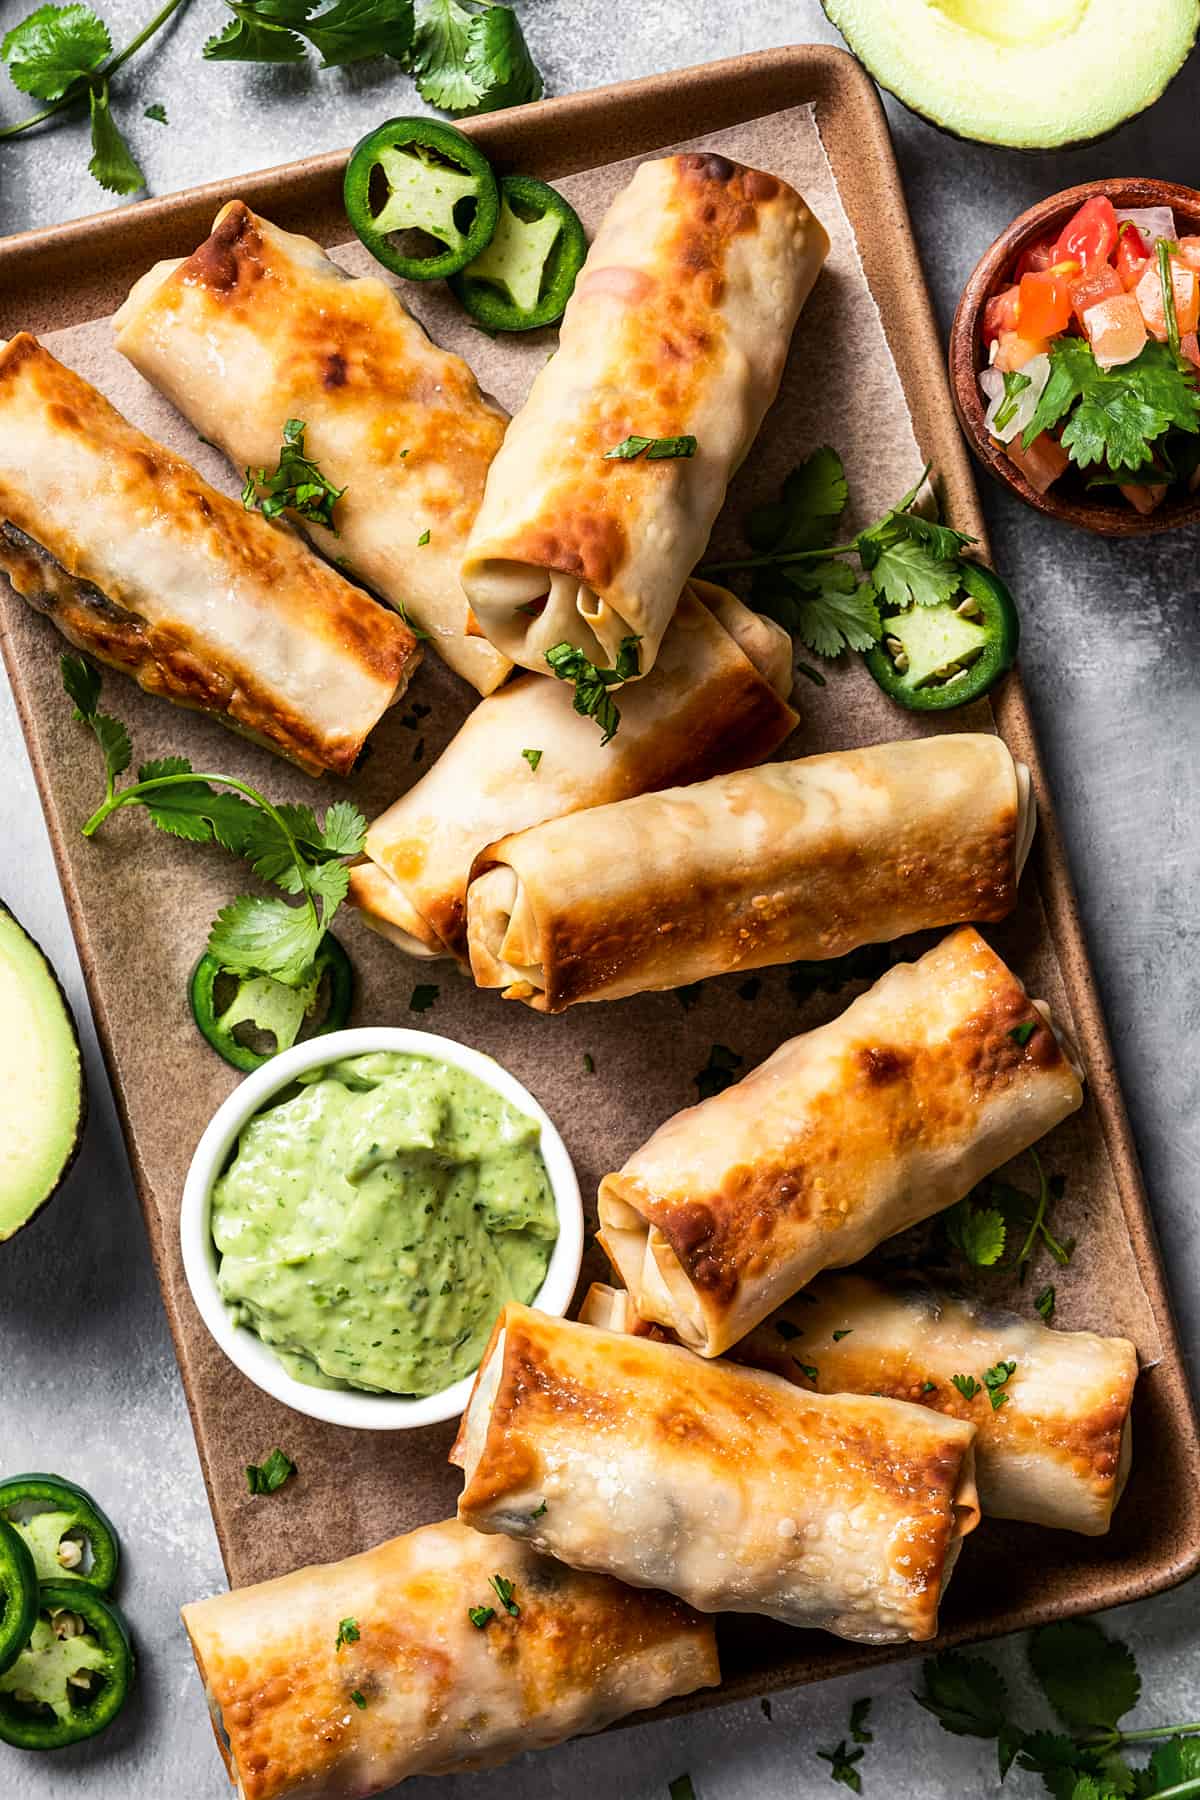 Homemade egg rolls with an avocado crema on the side.